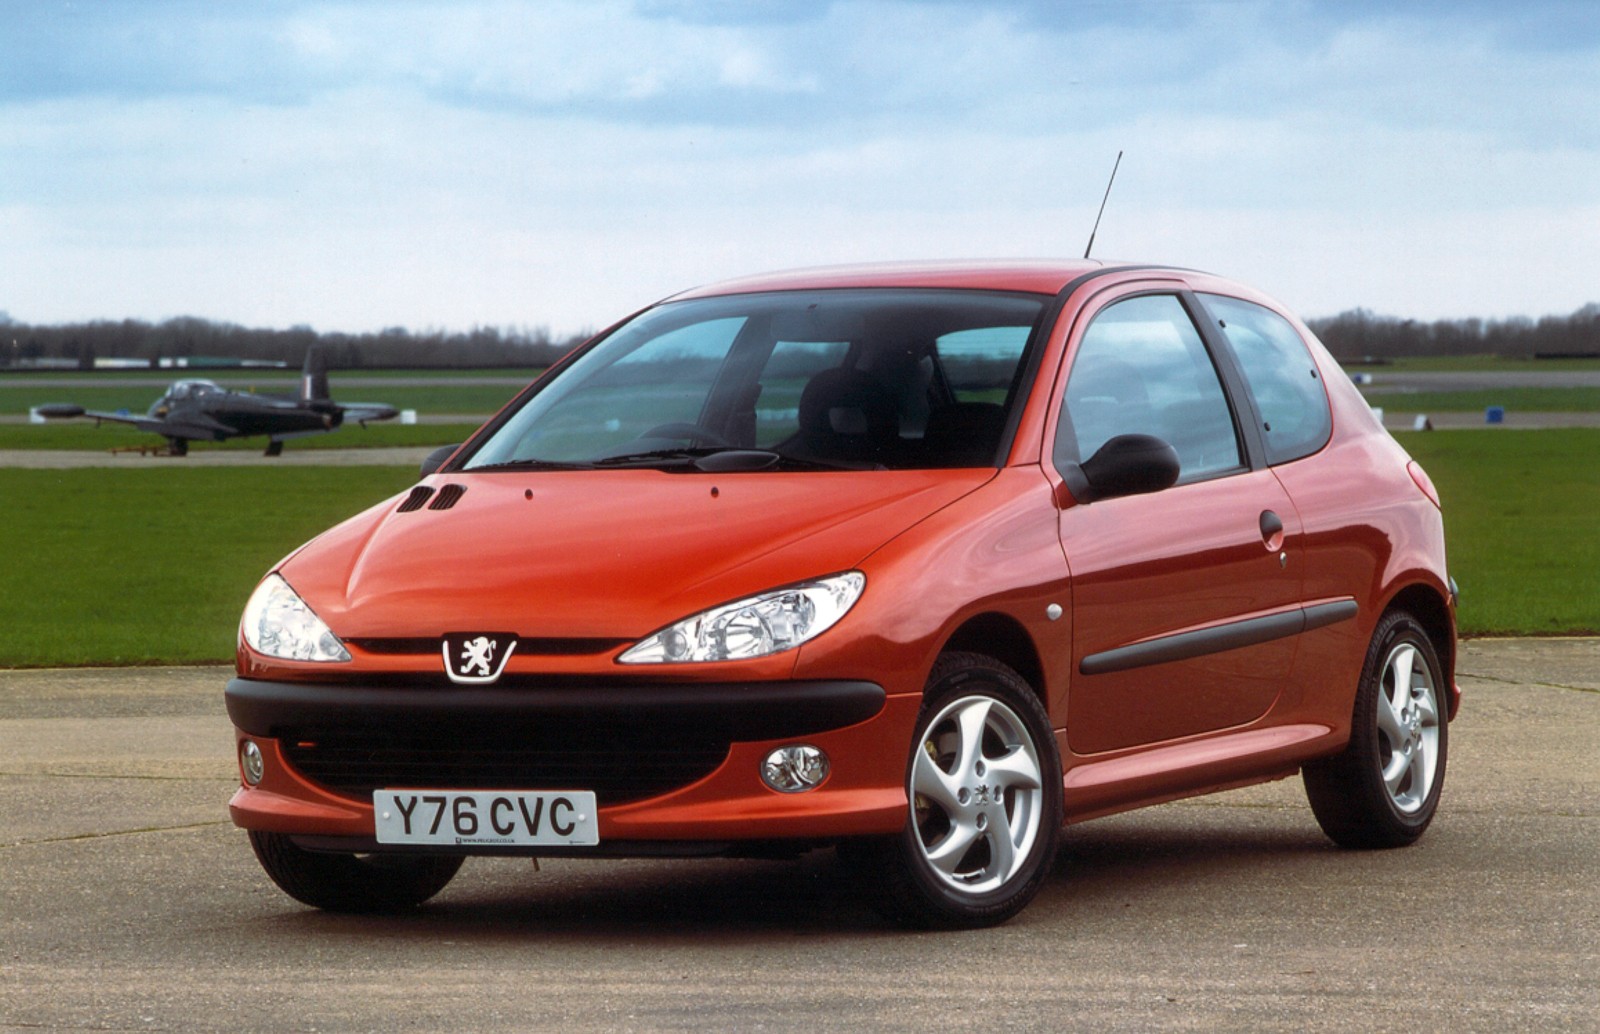 All PEUGEOT 206 5 Doors Models by Year (1998-2010) - Specs, Pictures &  History - autoevolution